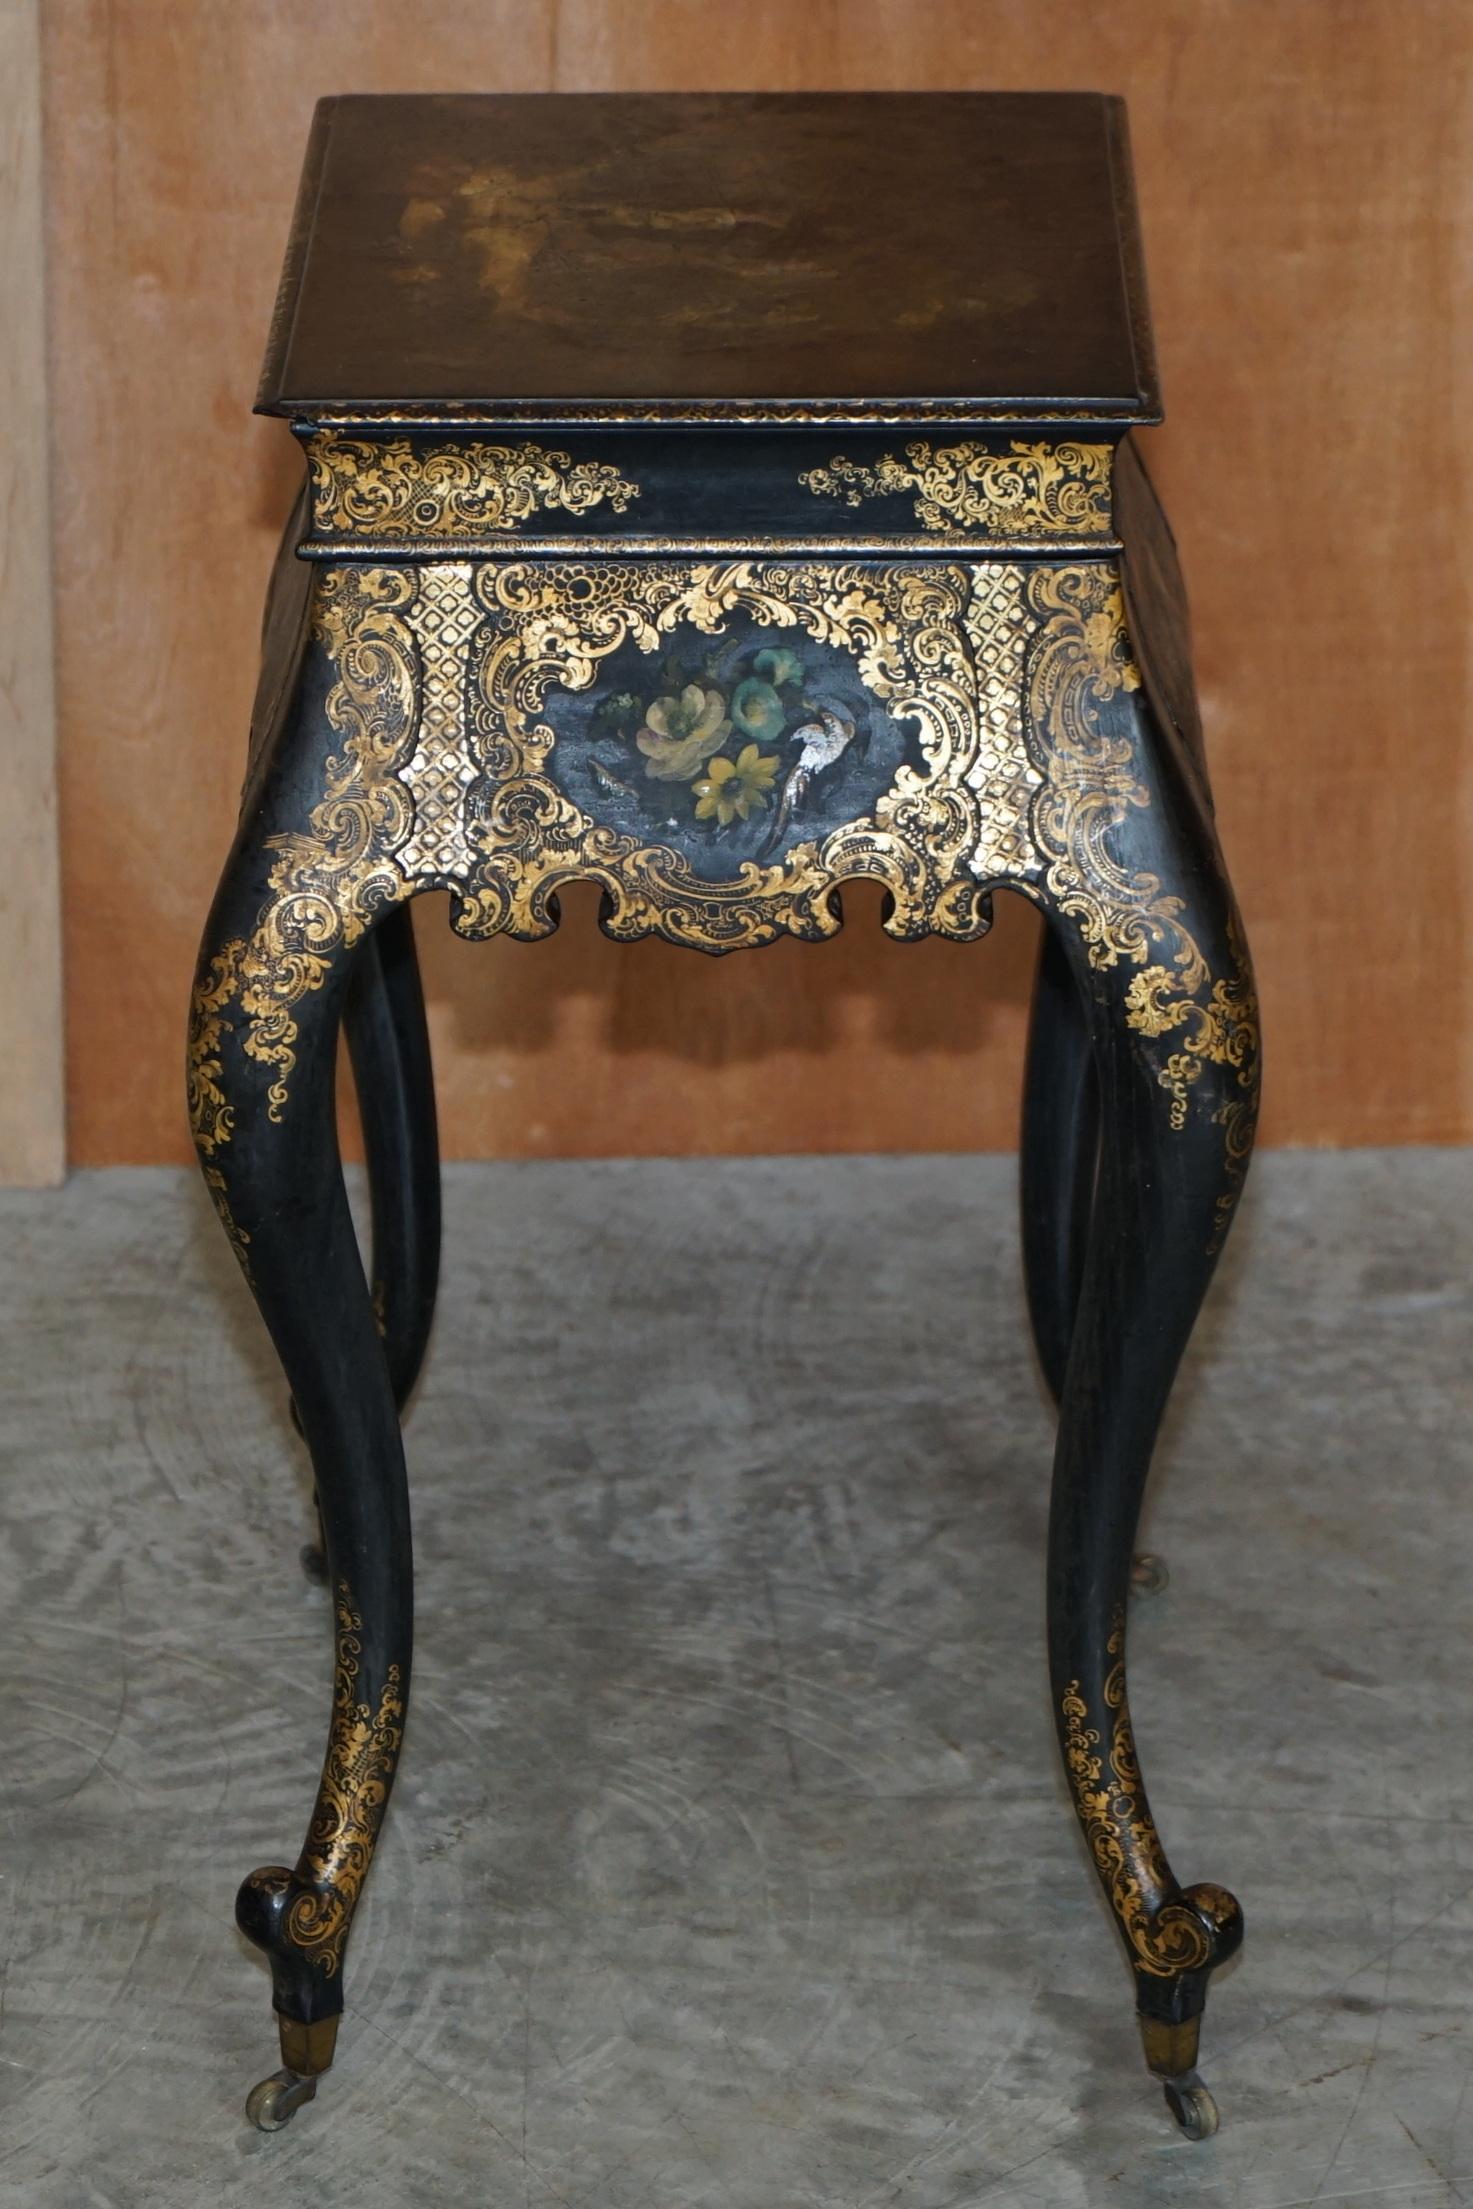 Georgian Antique circa 1800 George III Chinese Lacquer & Gold Gilt Work Table For Sale 9